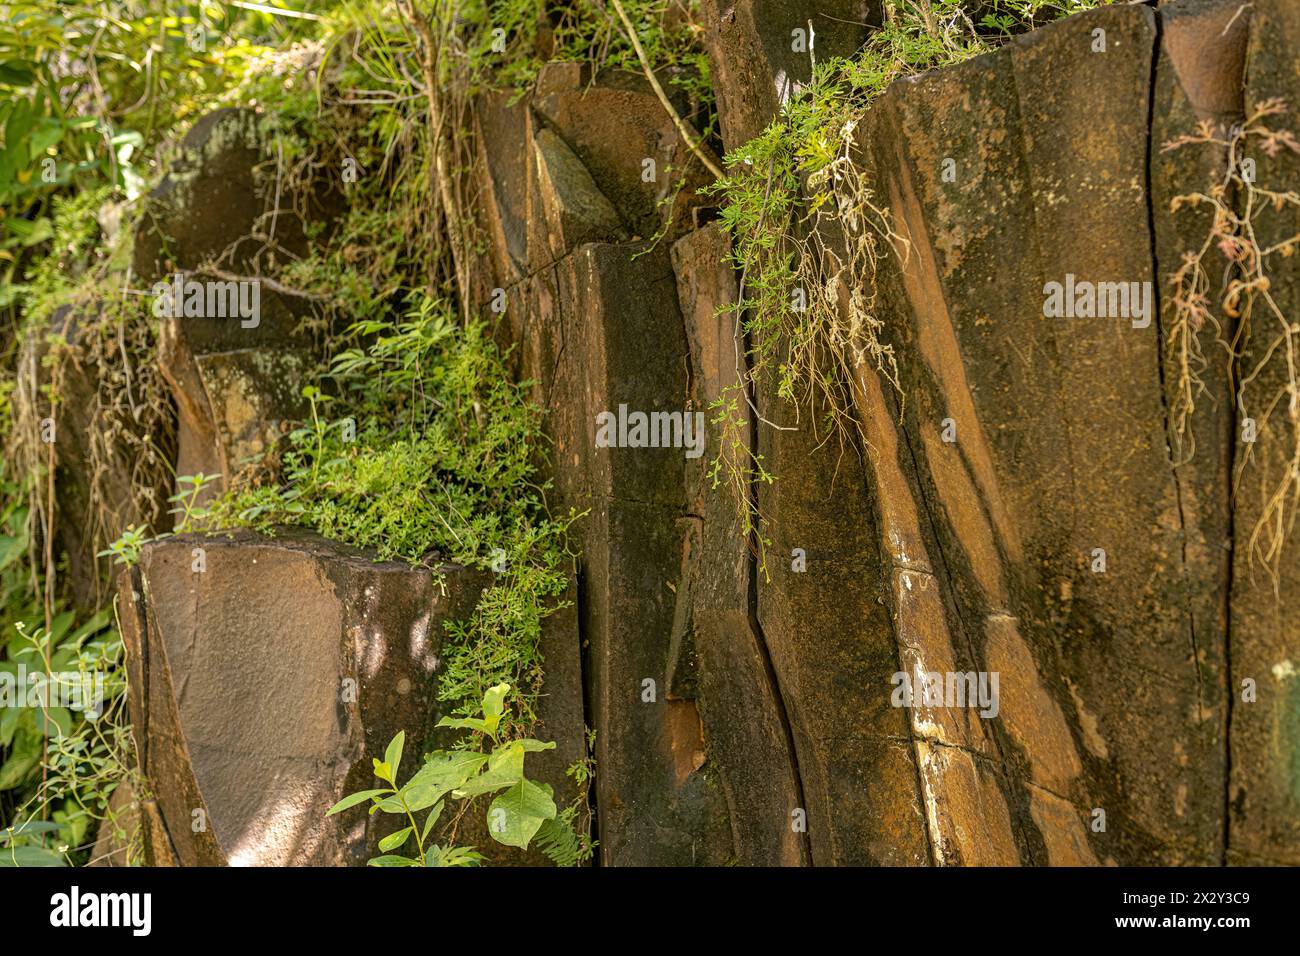 Basalt rock wall with plants in humid natural environment Stock Photo